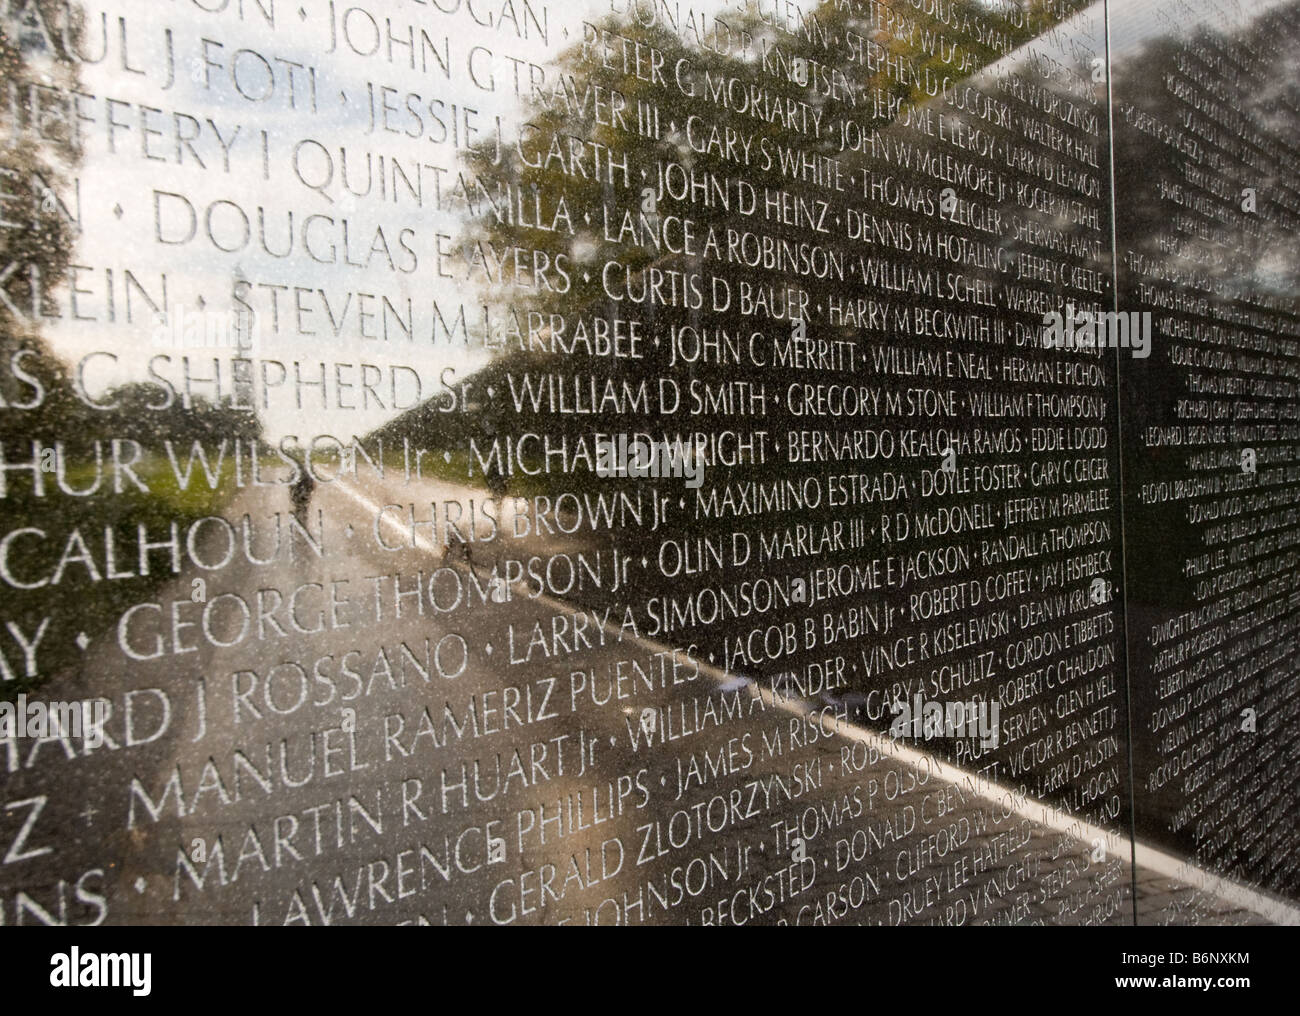 Engravings of names of war dead at the Vietnam Veterans Memorial on The Mall Washington DC United States of America USA Stock Photo